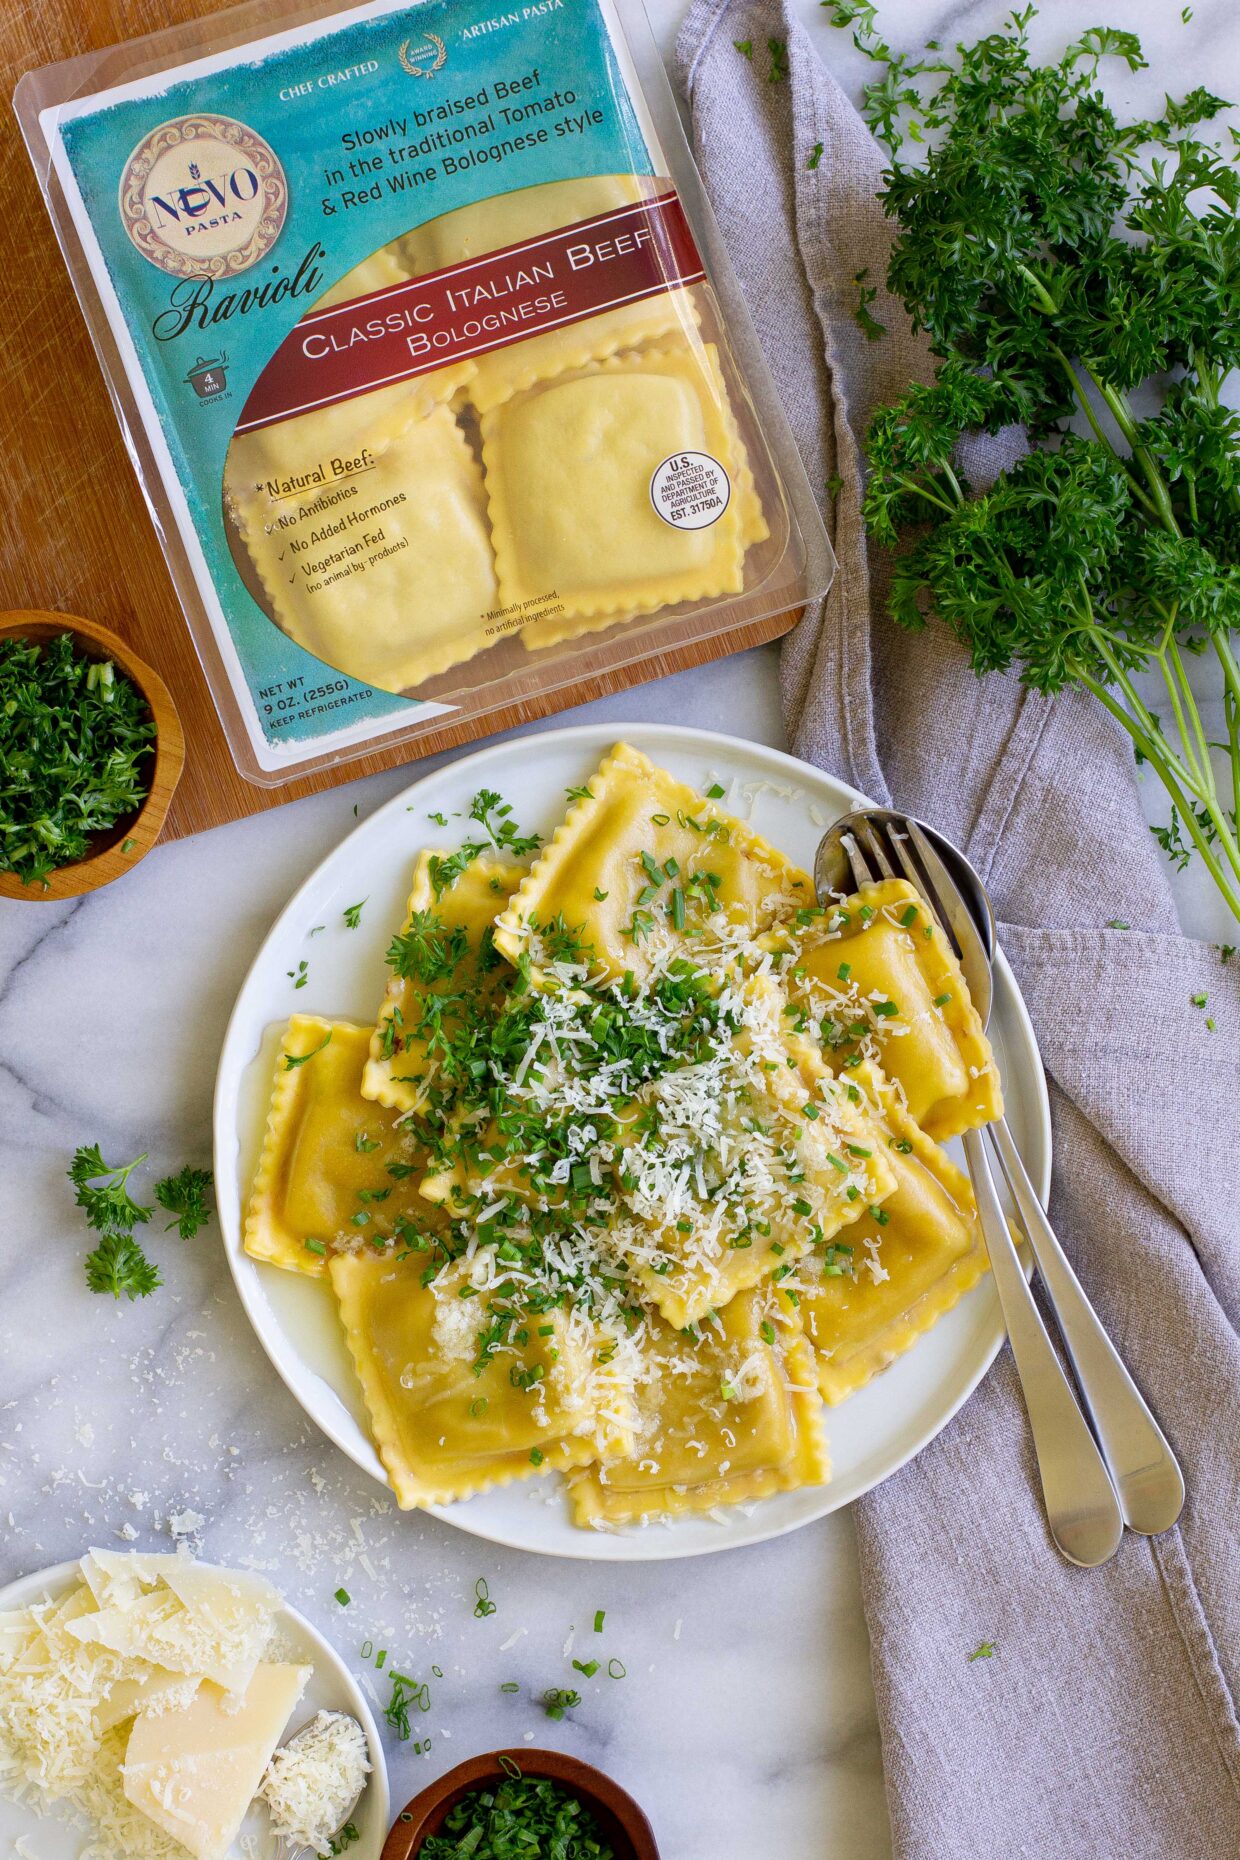 Classic Italian Beef Bolognese Ravioli with Butter, Fresh Herbs and Parmigiano Reggiano